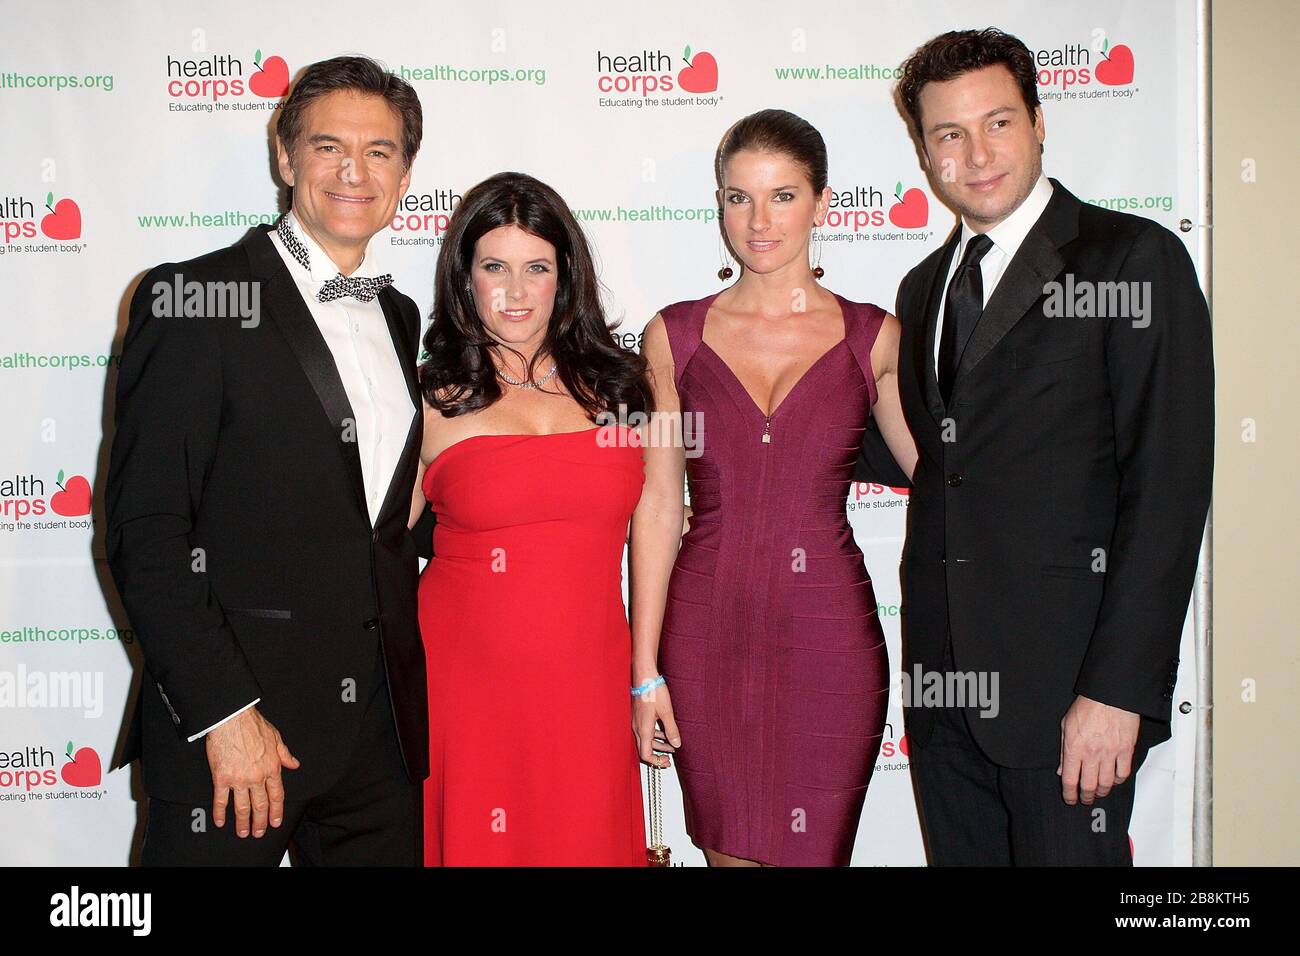 New York, NY, USA. 21 April, 2010. Mehmet Oz, Lisa Oz, Nicola Mar, Rocco DiSpirito at the 'Garden of Good & Evil' presented by Dr. Oz at Pier Sixty at Chelsea Piers. Credit: Steve Mack/Alamy Stock Photo